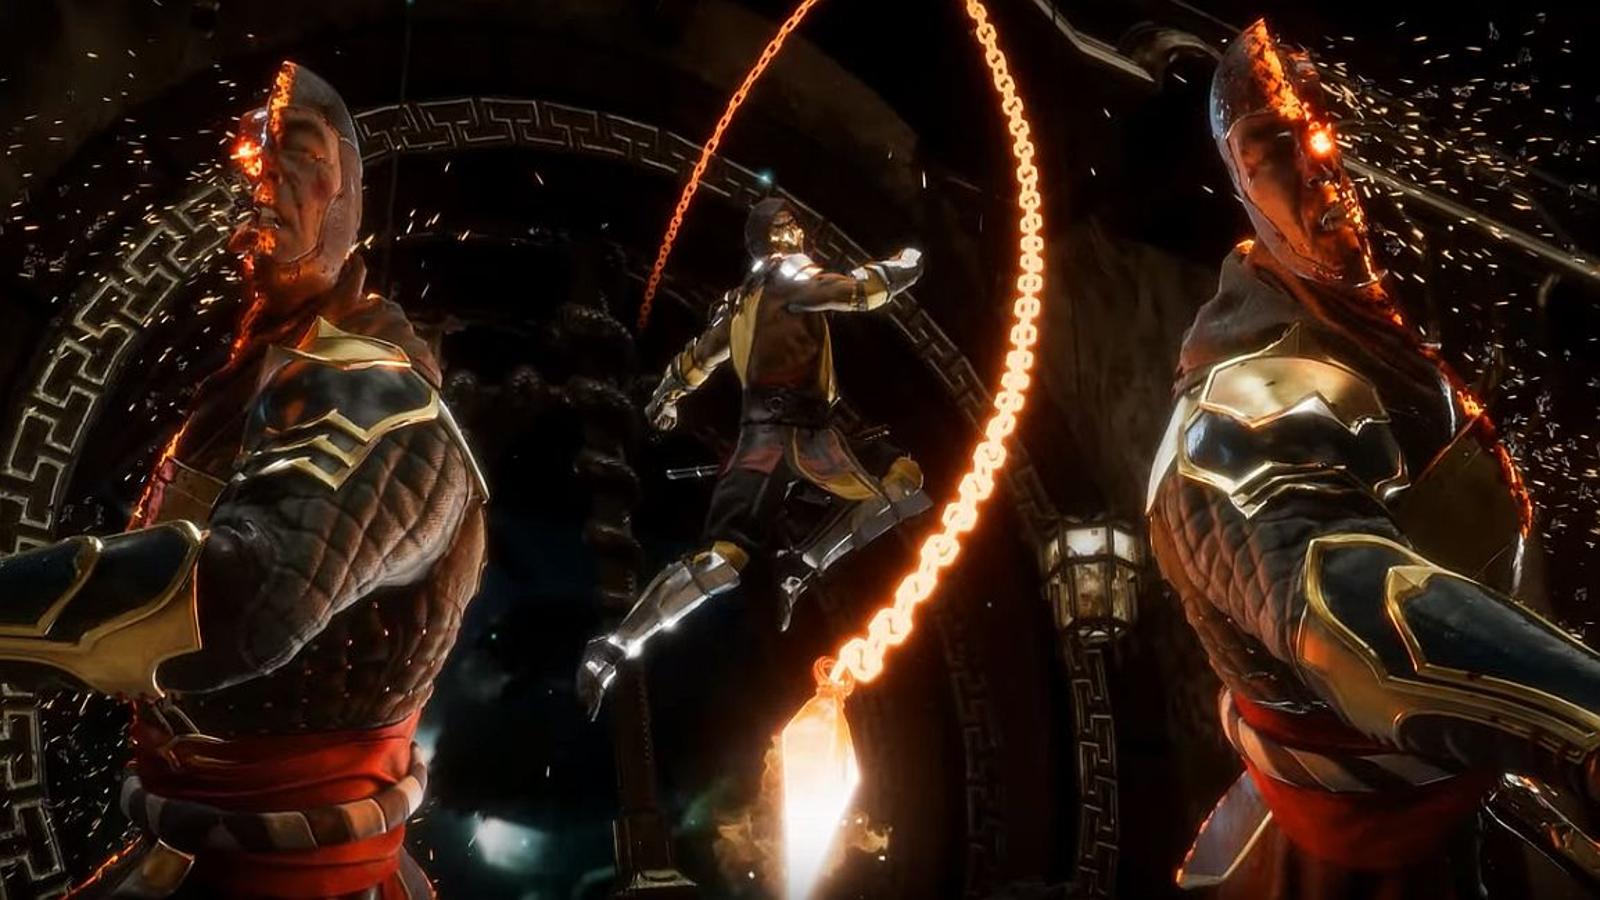 Mortal Kombat 11 Fatality List: how to do all fatalities and